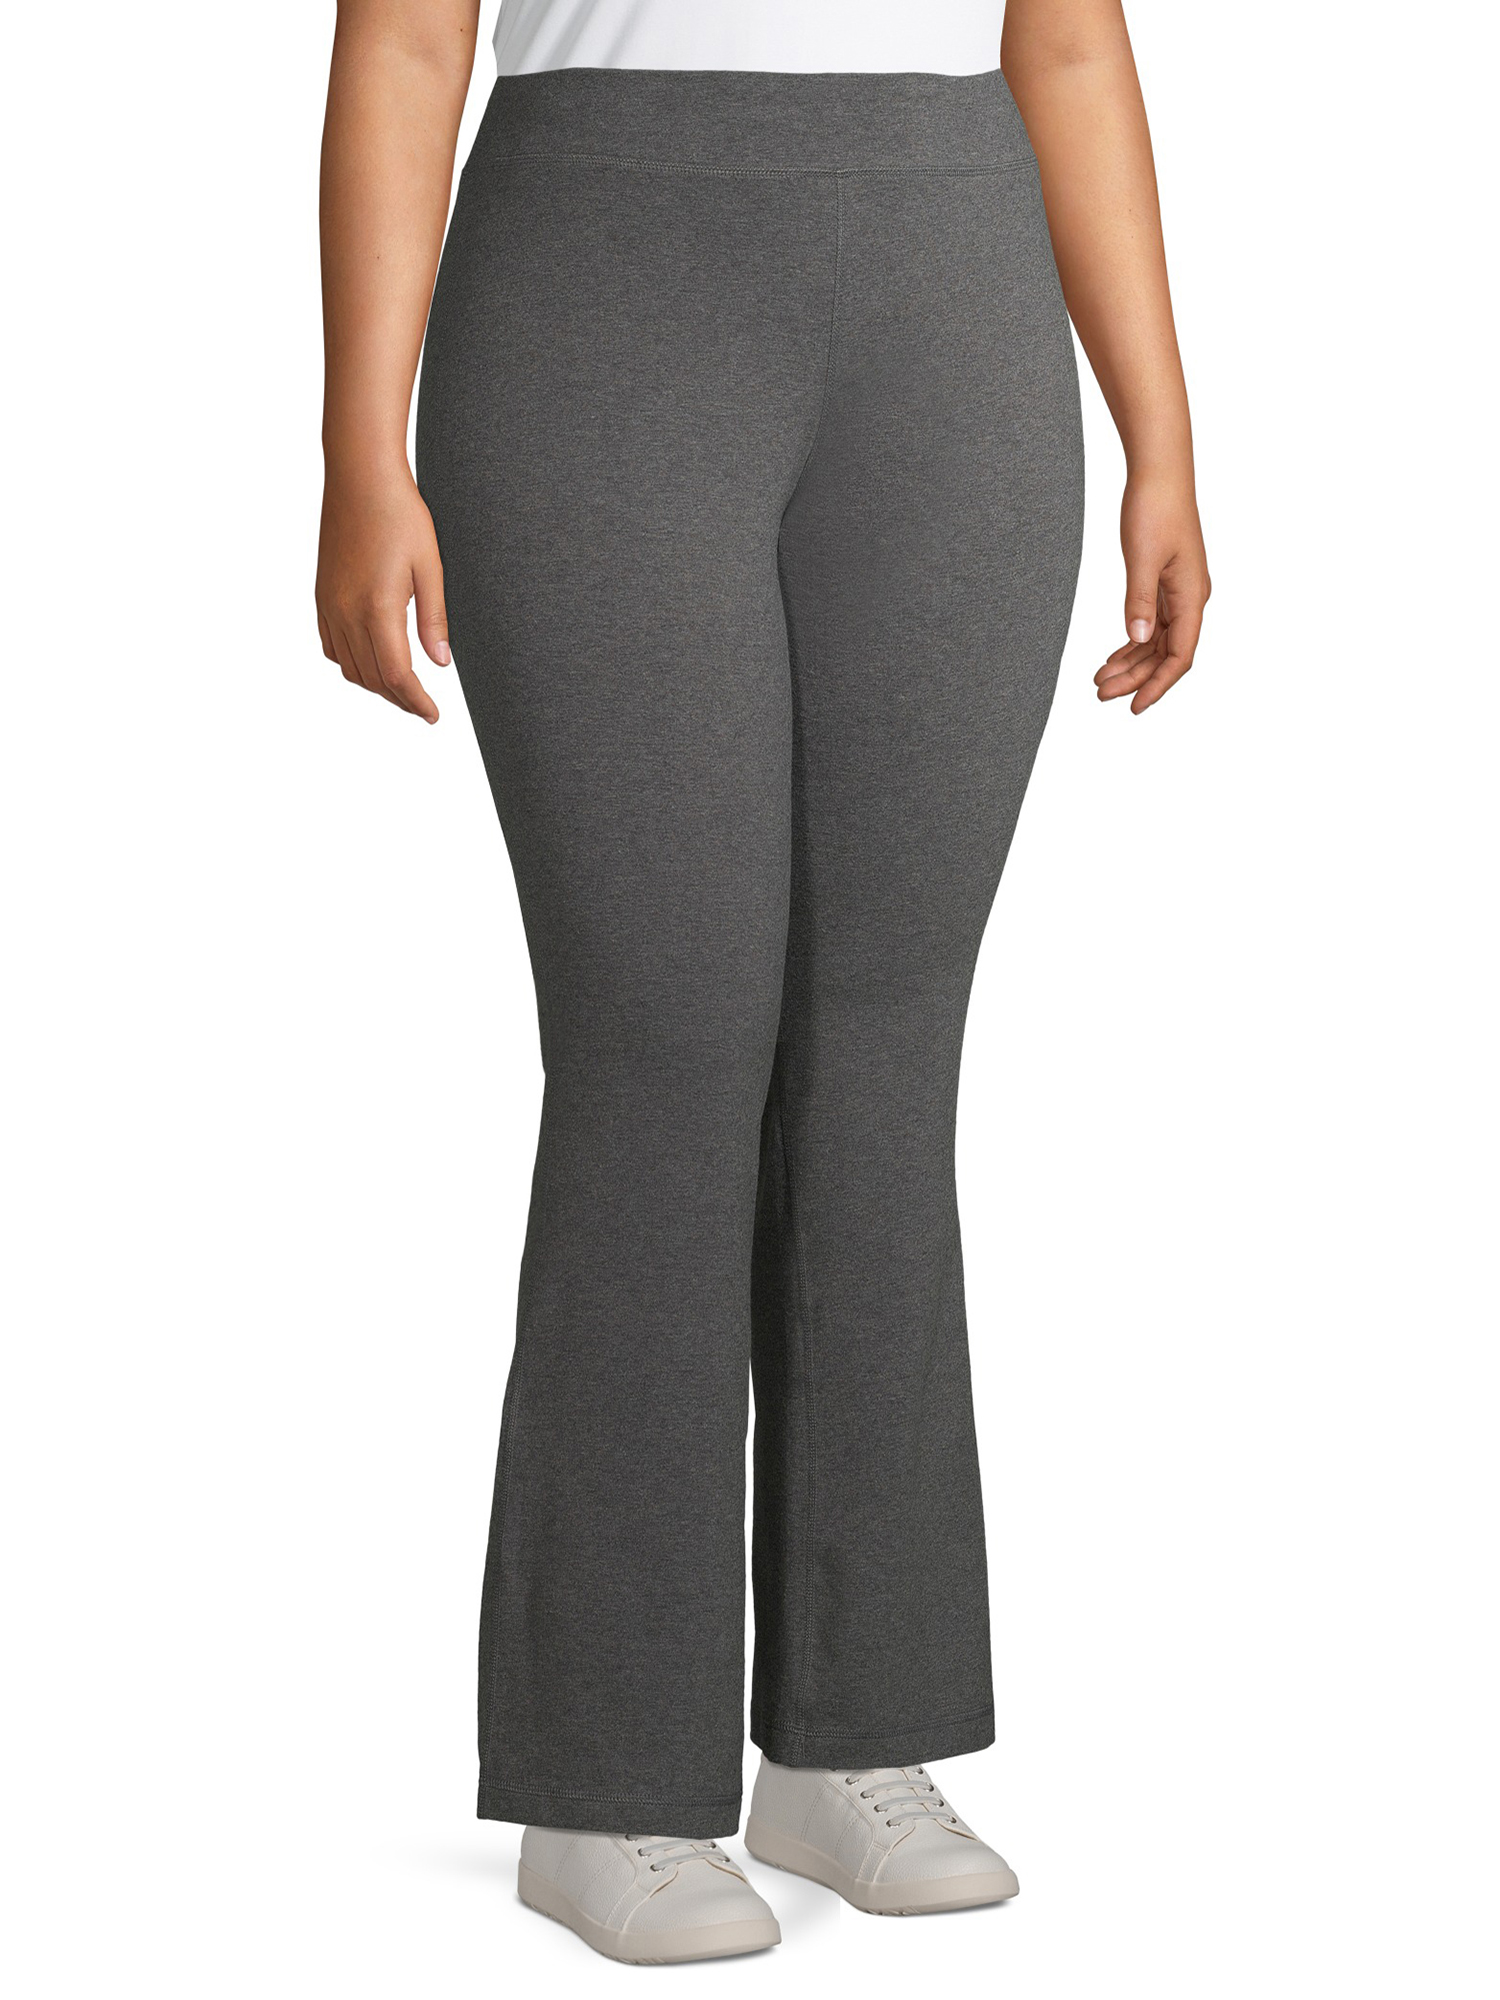 Athletic Works Women’s and Women's Plus Stretch Cotton Blend Straight Leg Pants - image 5 of 7